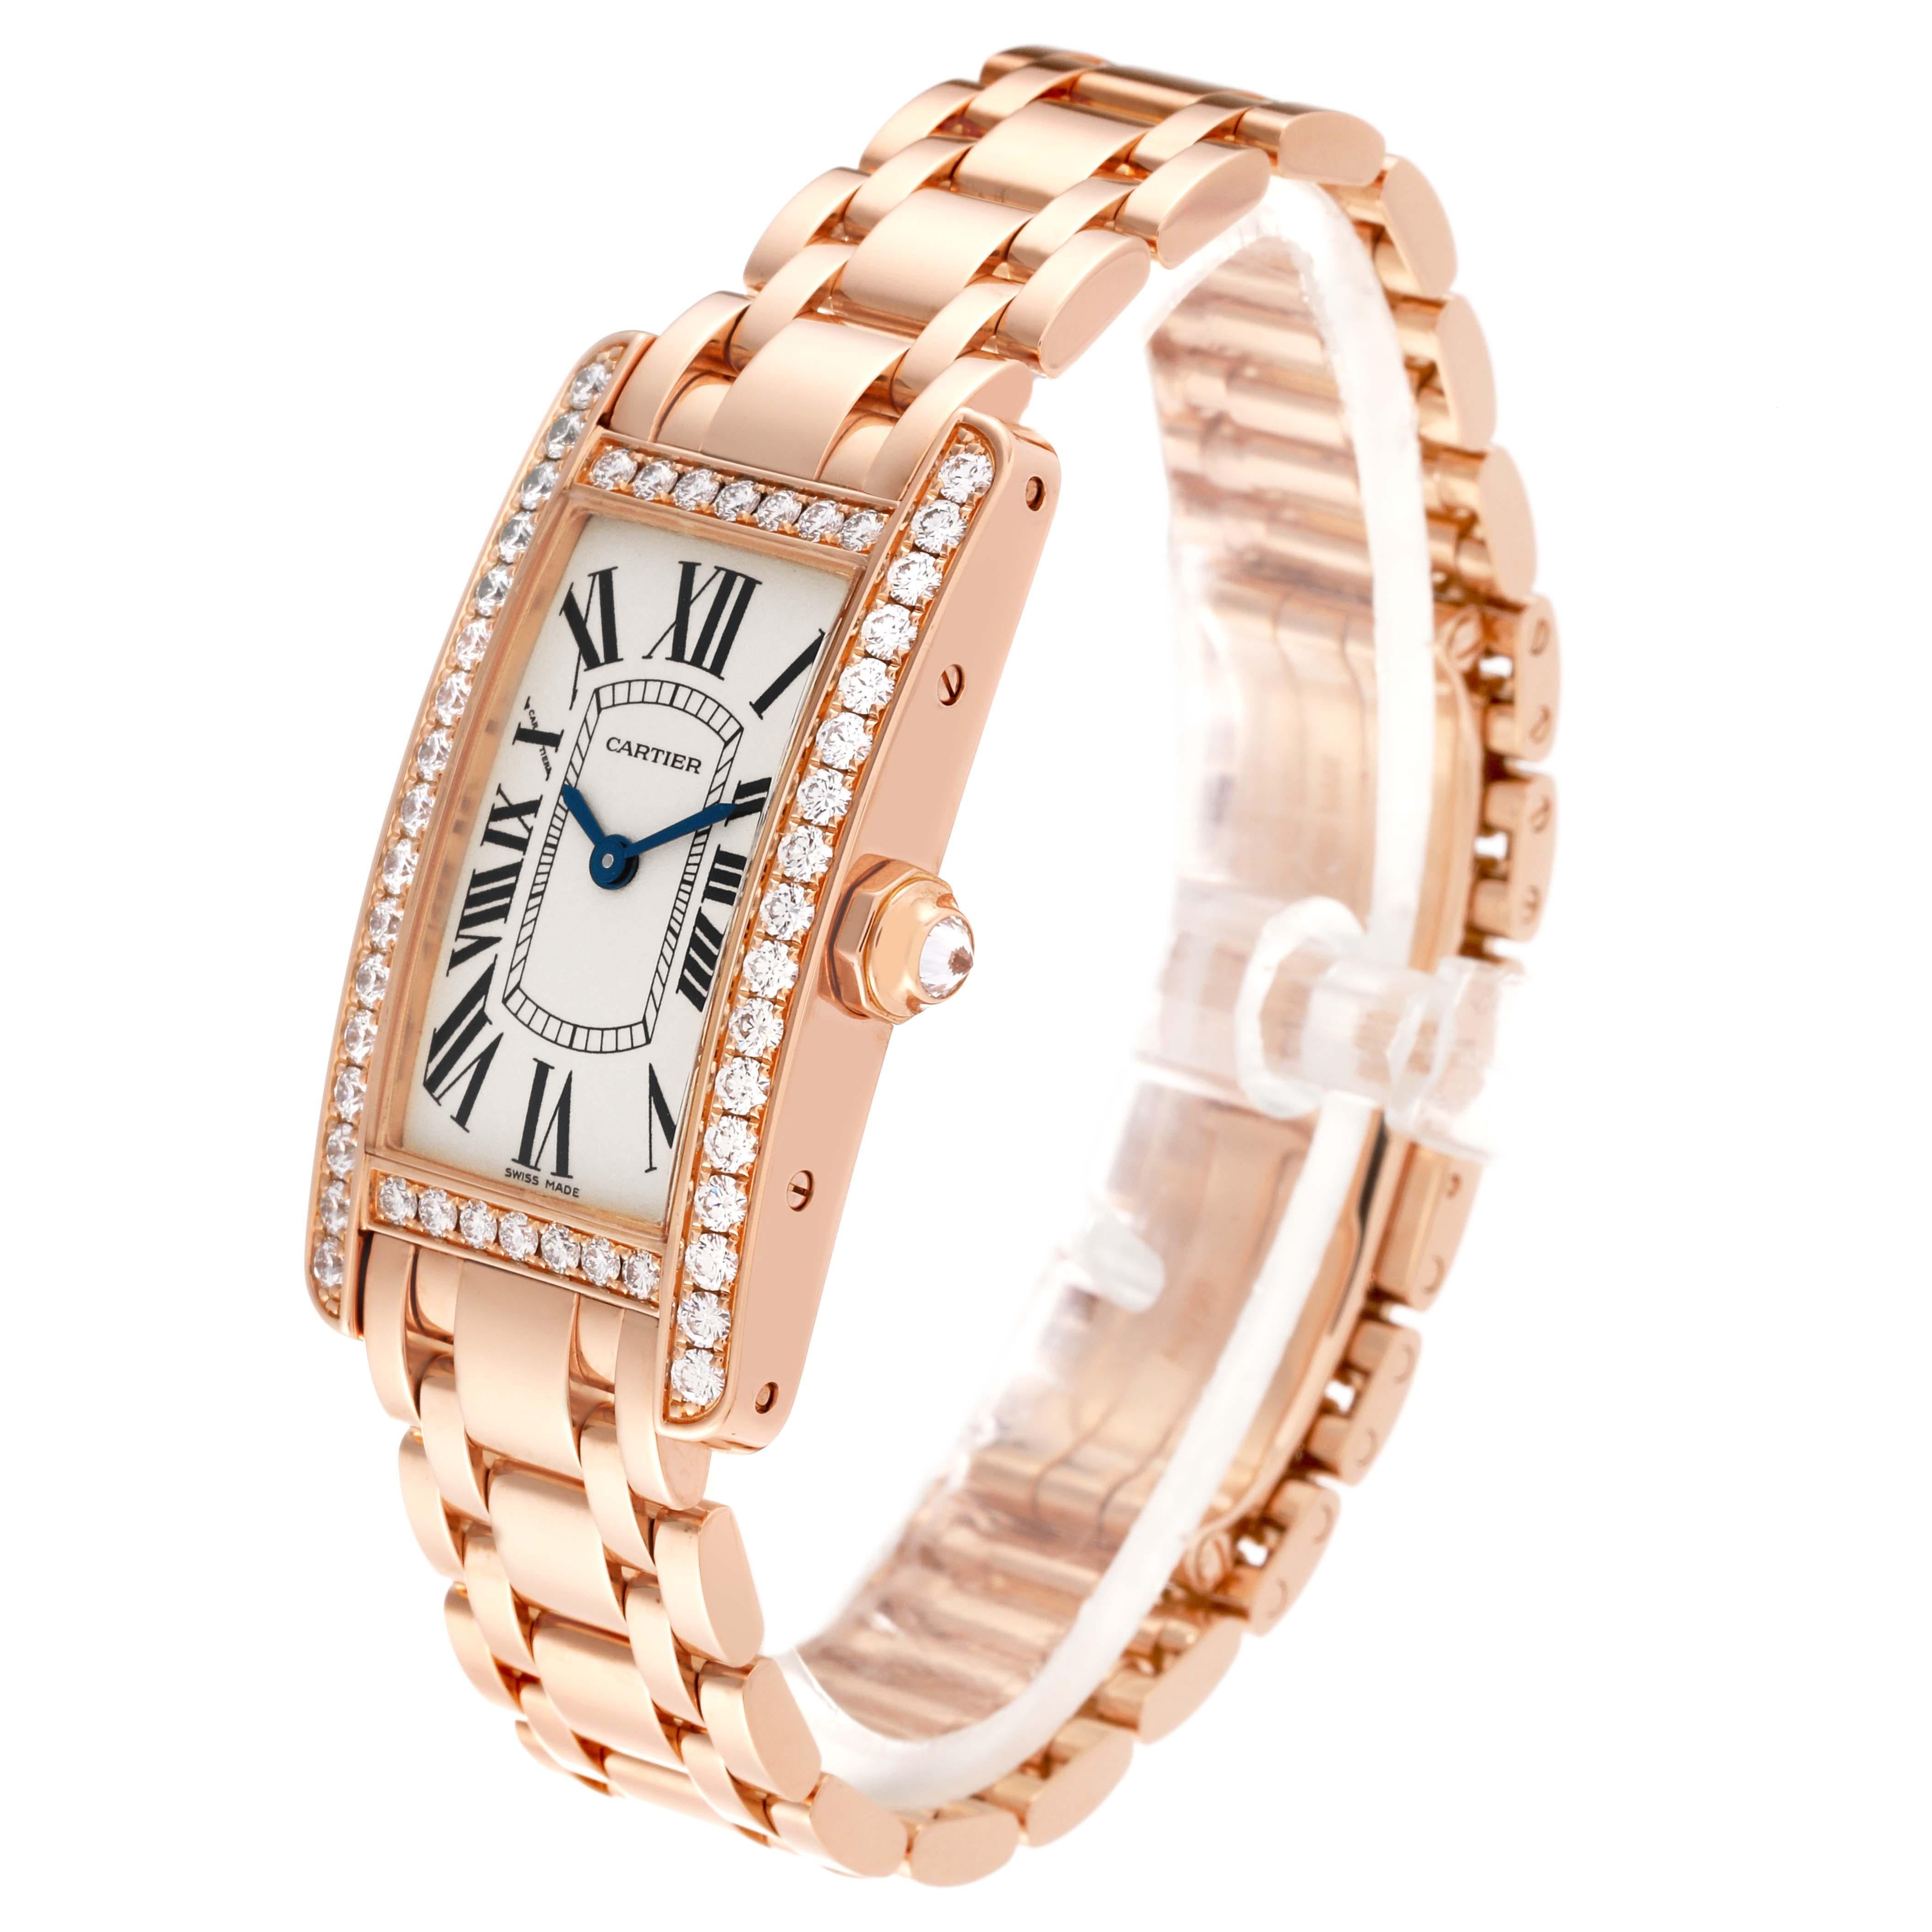 Cartier Tank Americaine Rose Gold Diamond Ladies Watch WB7079M5 Box Card For Sale 4